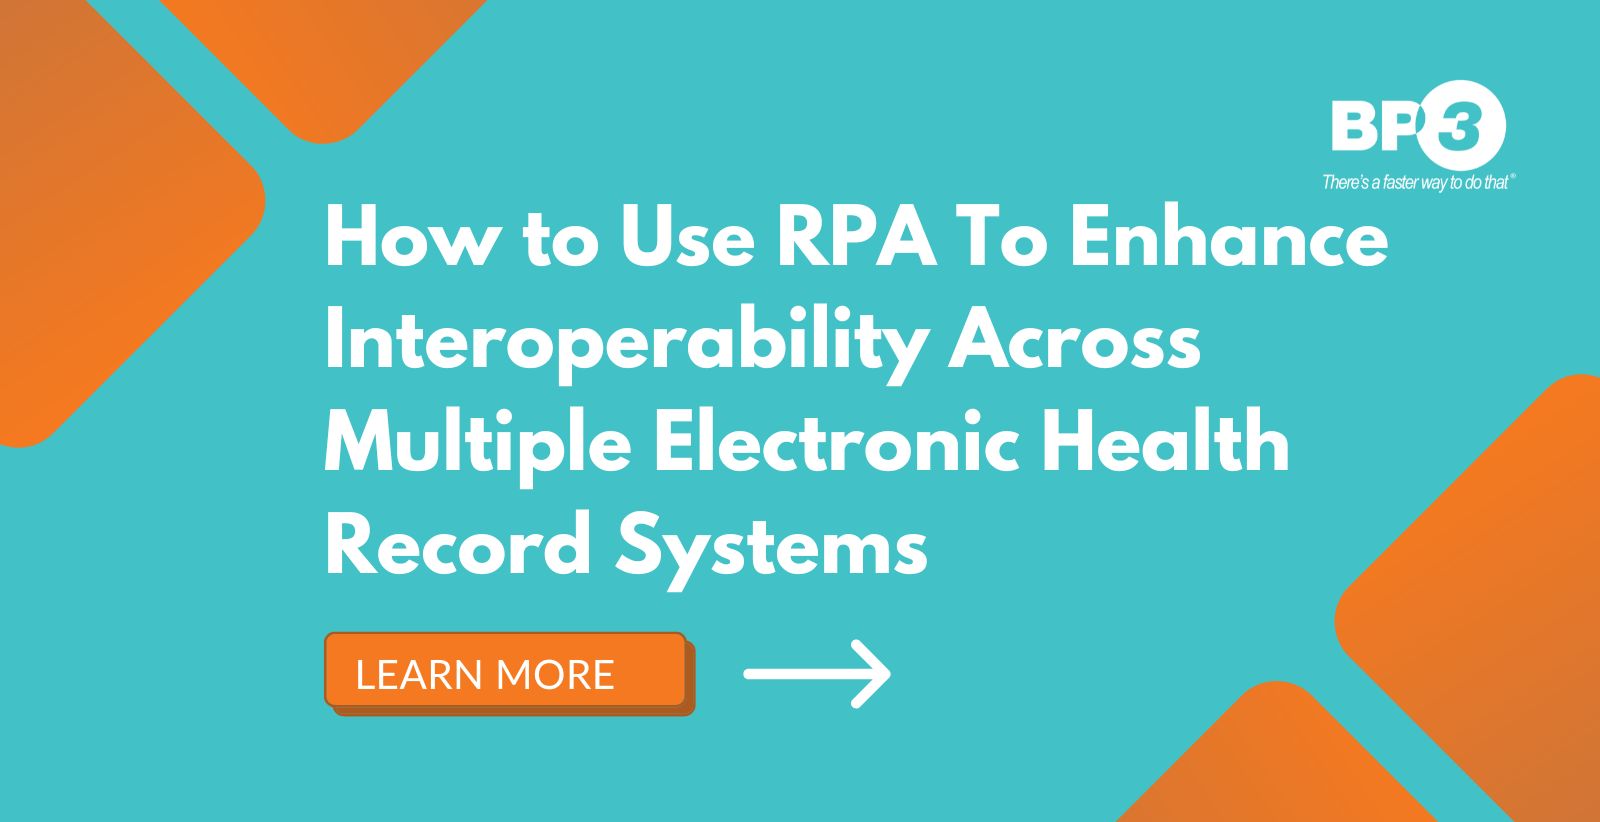 How to Use RPA To Enhance Interoperability Across Multiple Electronic Health Record Systems